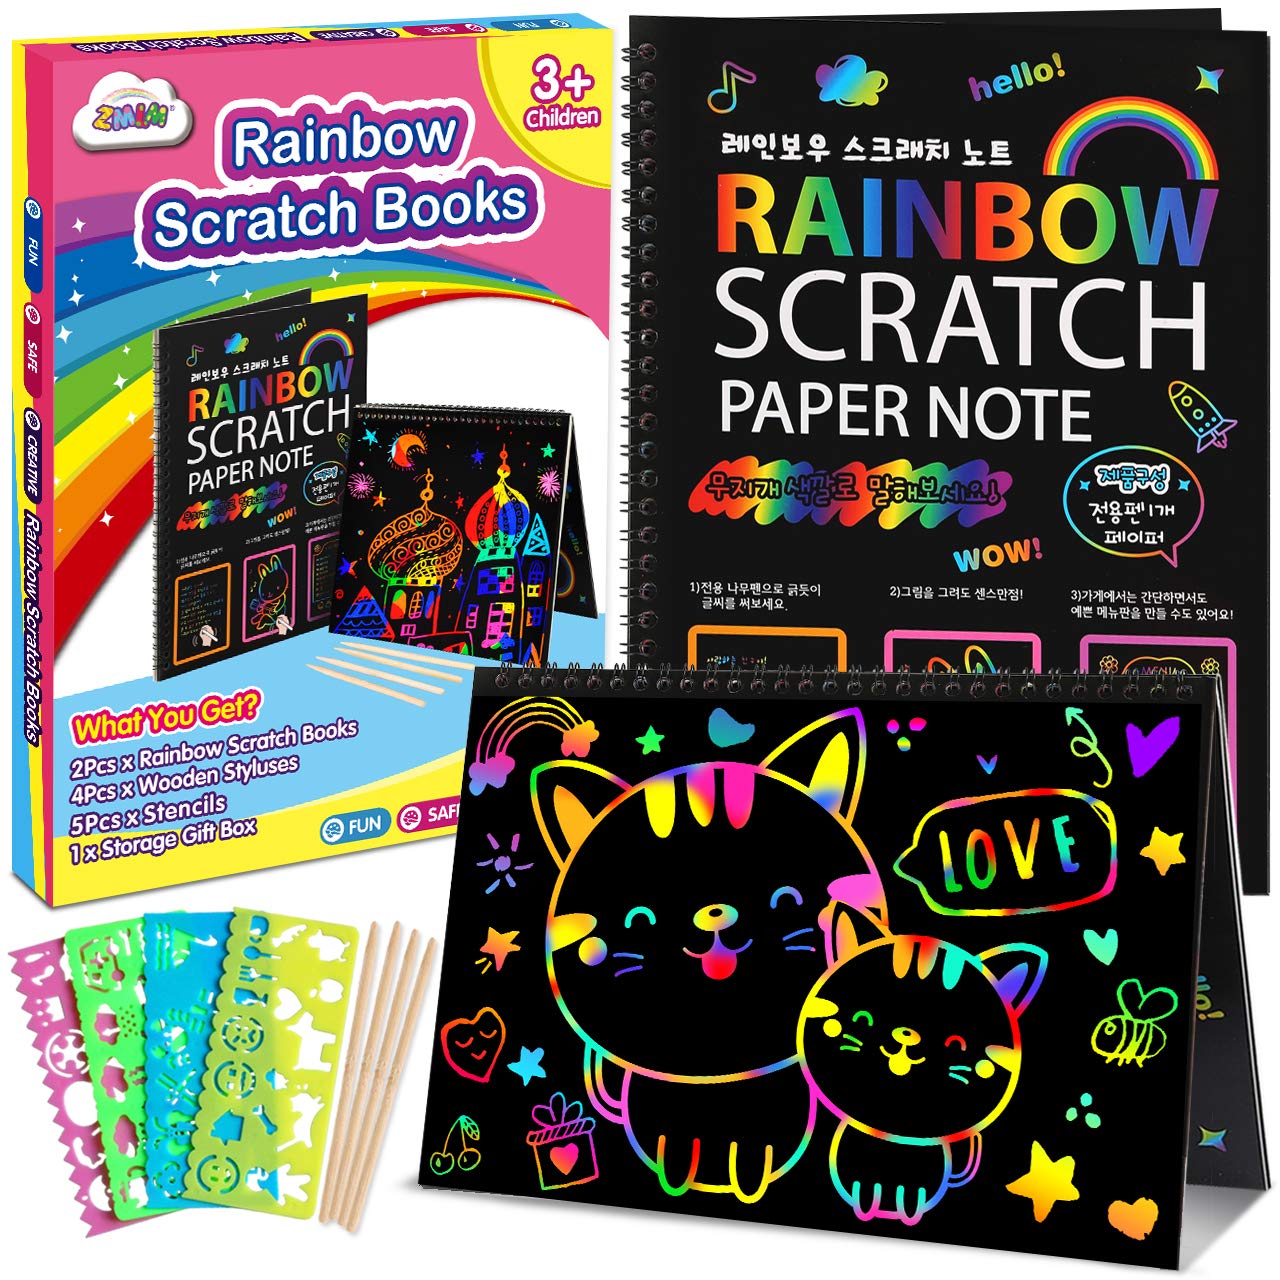 ZMLM Scratch Paper Art-Crafts Notebook: 2 Pack Bulk Rainbow Magic Paper Supplies Toys for 3 4 5 6 7 8 9 10 Years Old Girls Kids Favors Gifts for Birthday Halloween Christmas Party Games Projects Kits